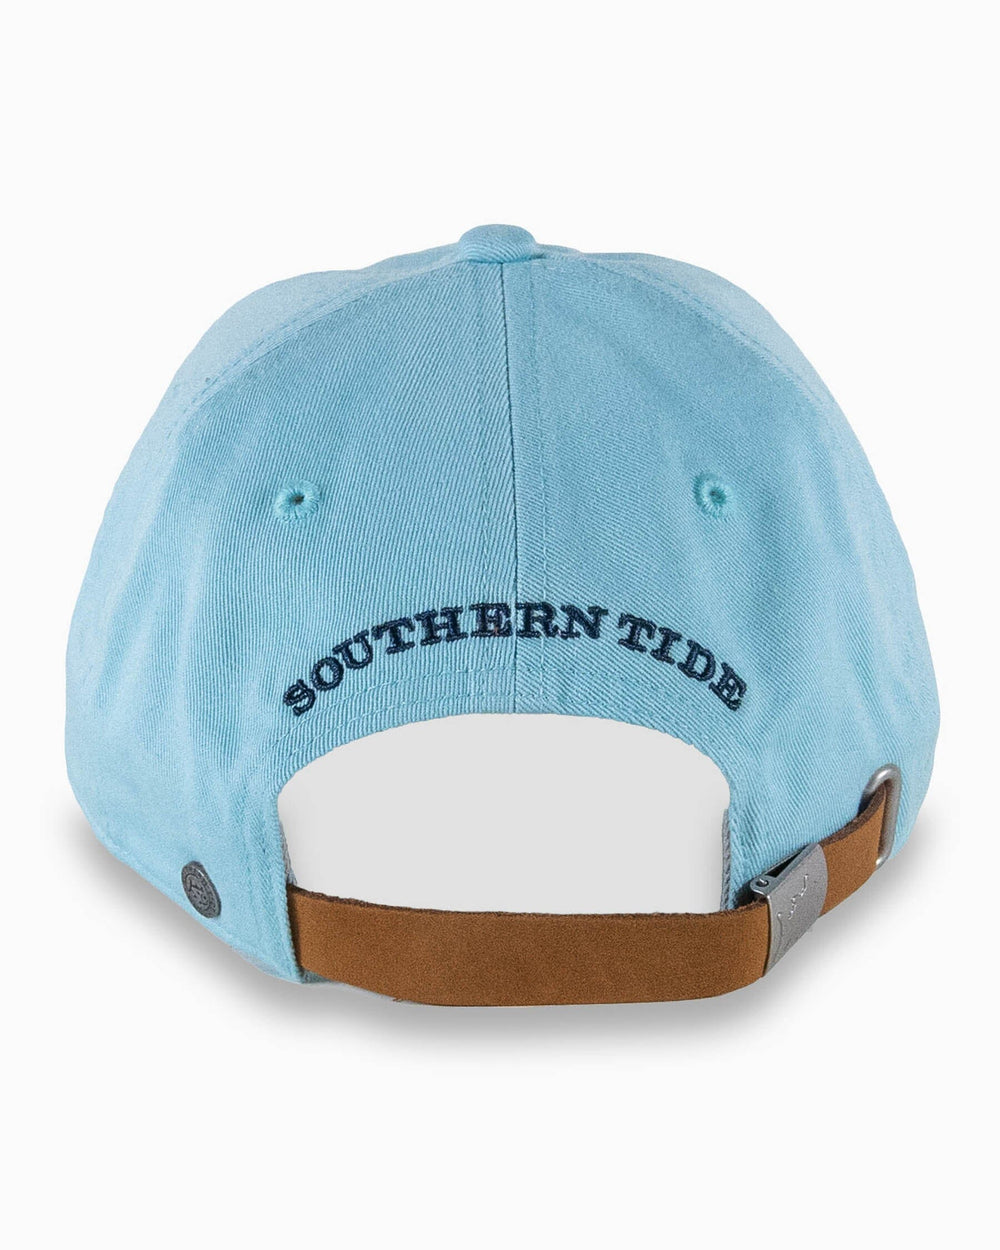 The back view of the Southern Tide Mini Skipjack Leather Strap Hat by Southern Tide - Aquamarine